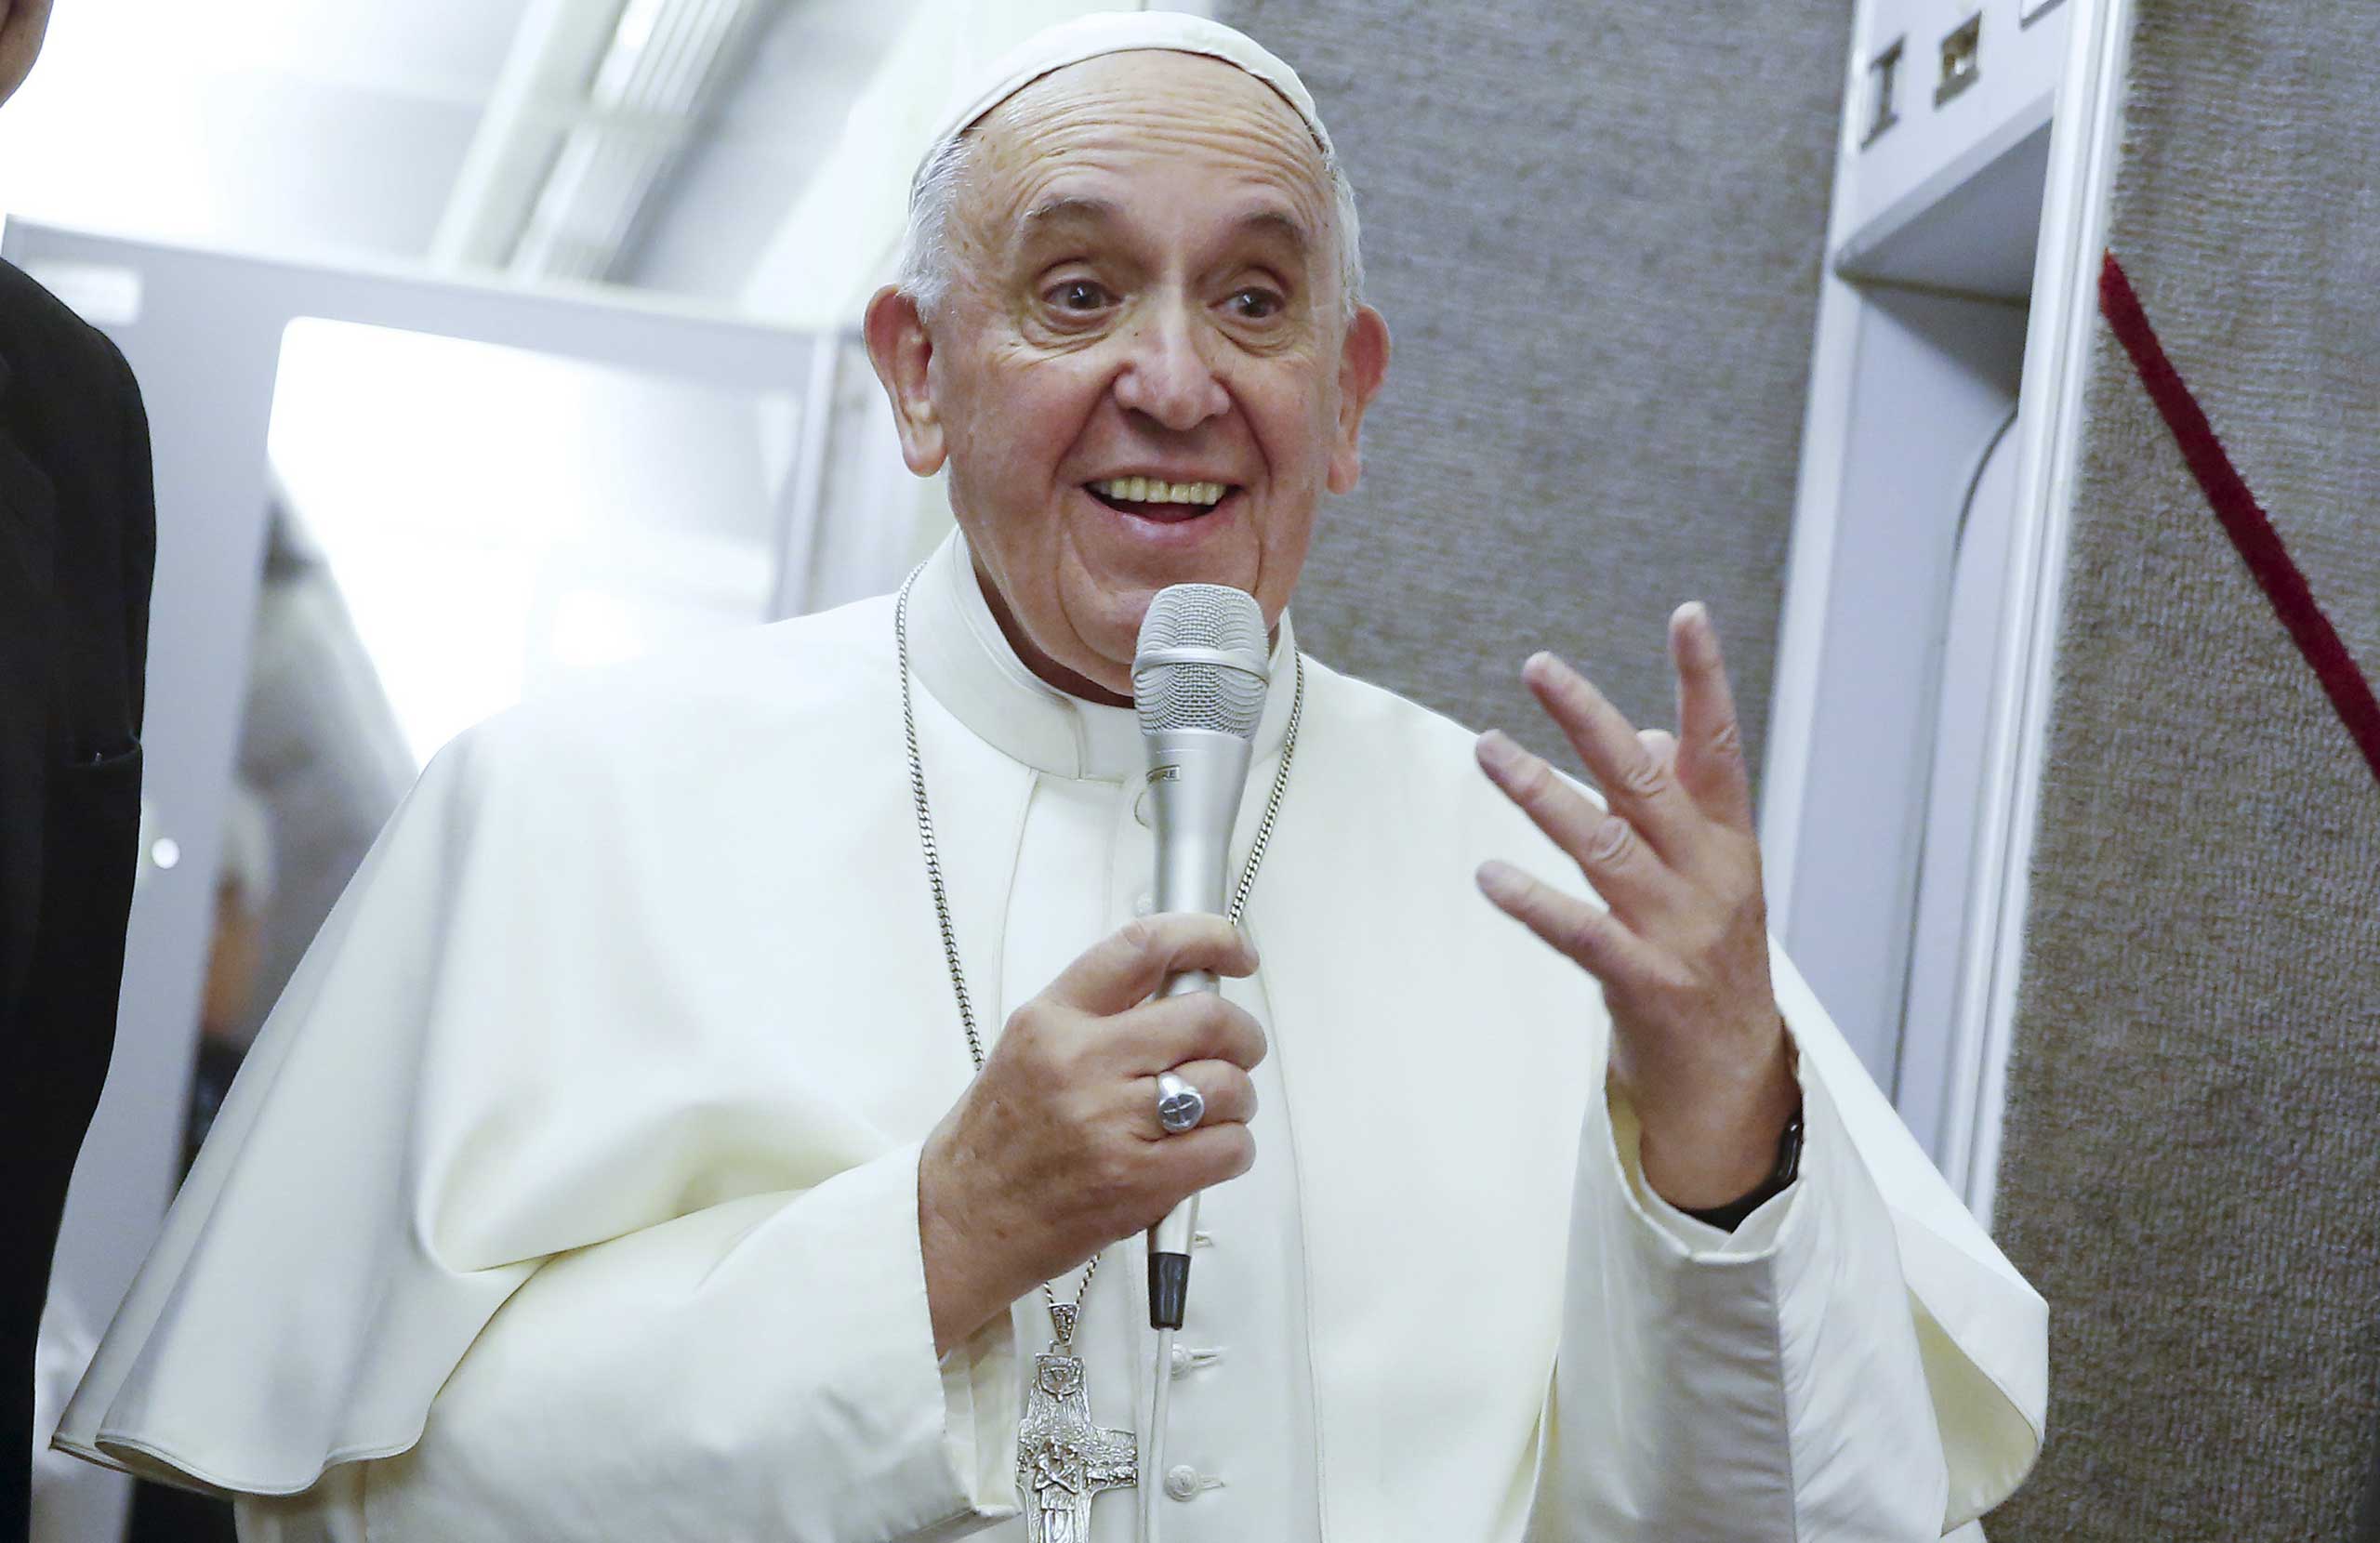 Pope Francis talks aboard the papal plane while en route to Italy Sept. 28, 2015. (Tony Gentile—Reuters)